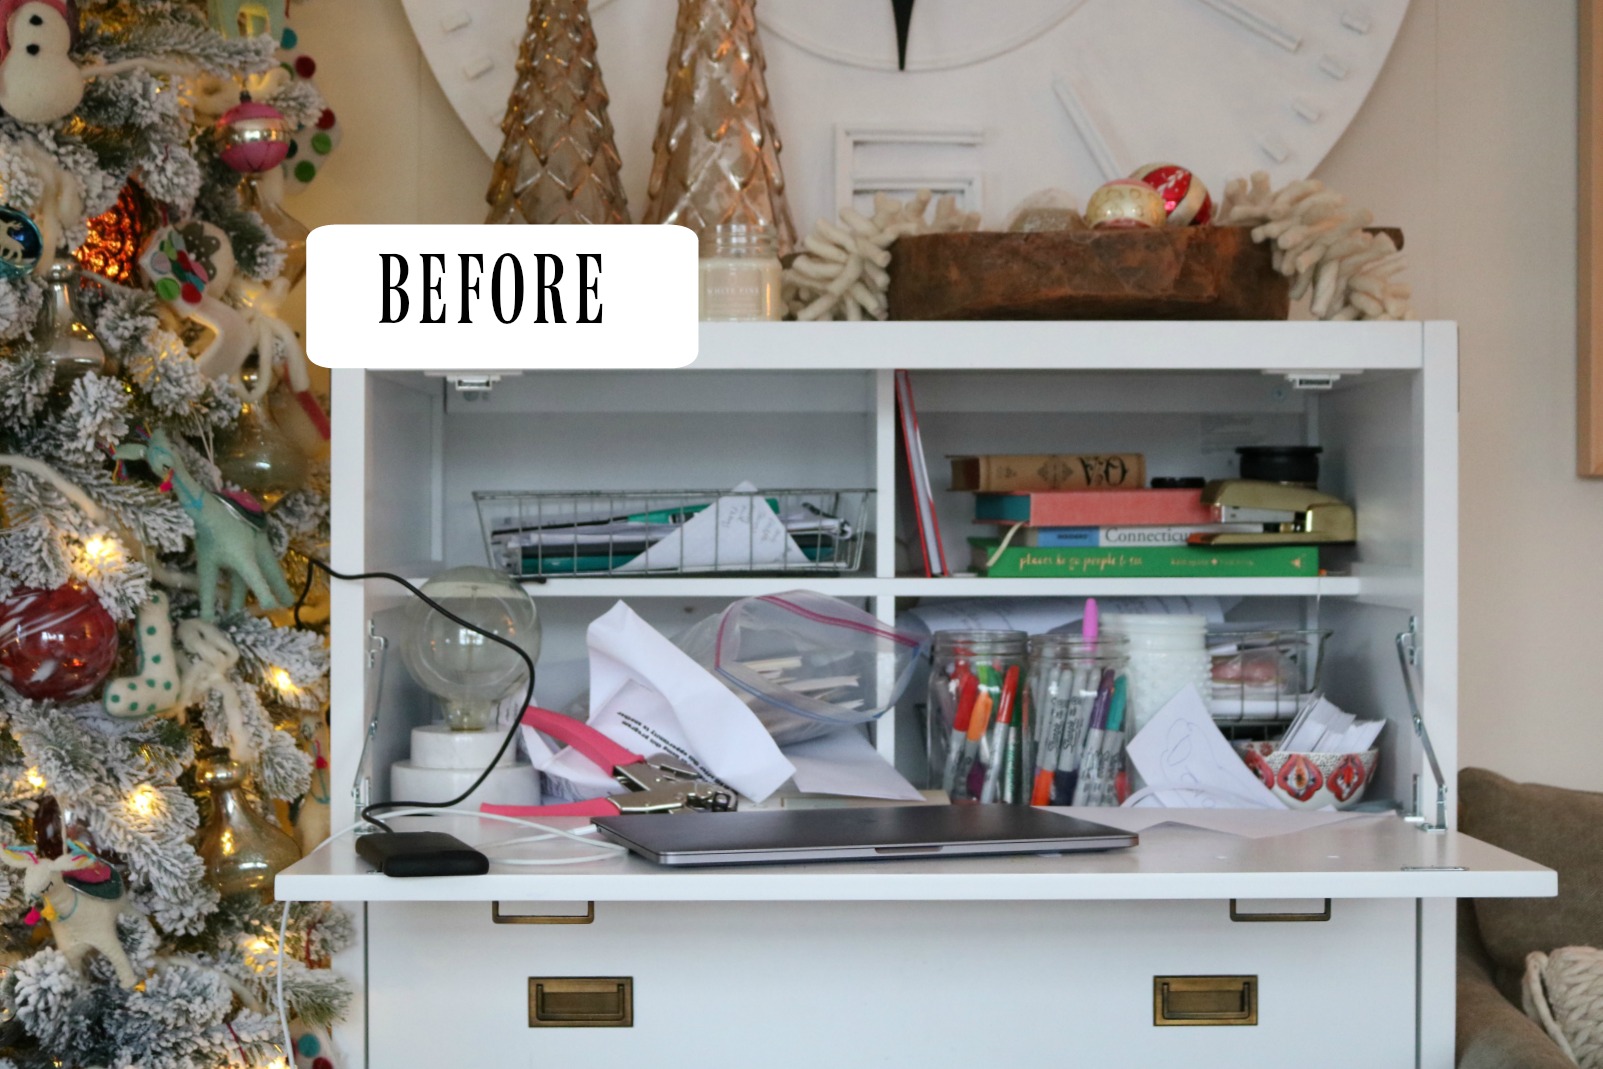 How to Manage Cords and Papers- Organizing Small Spaces